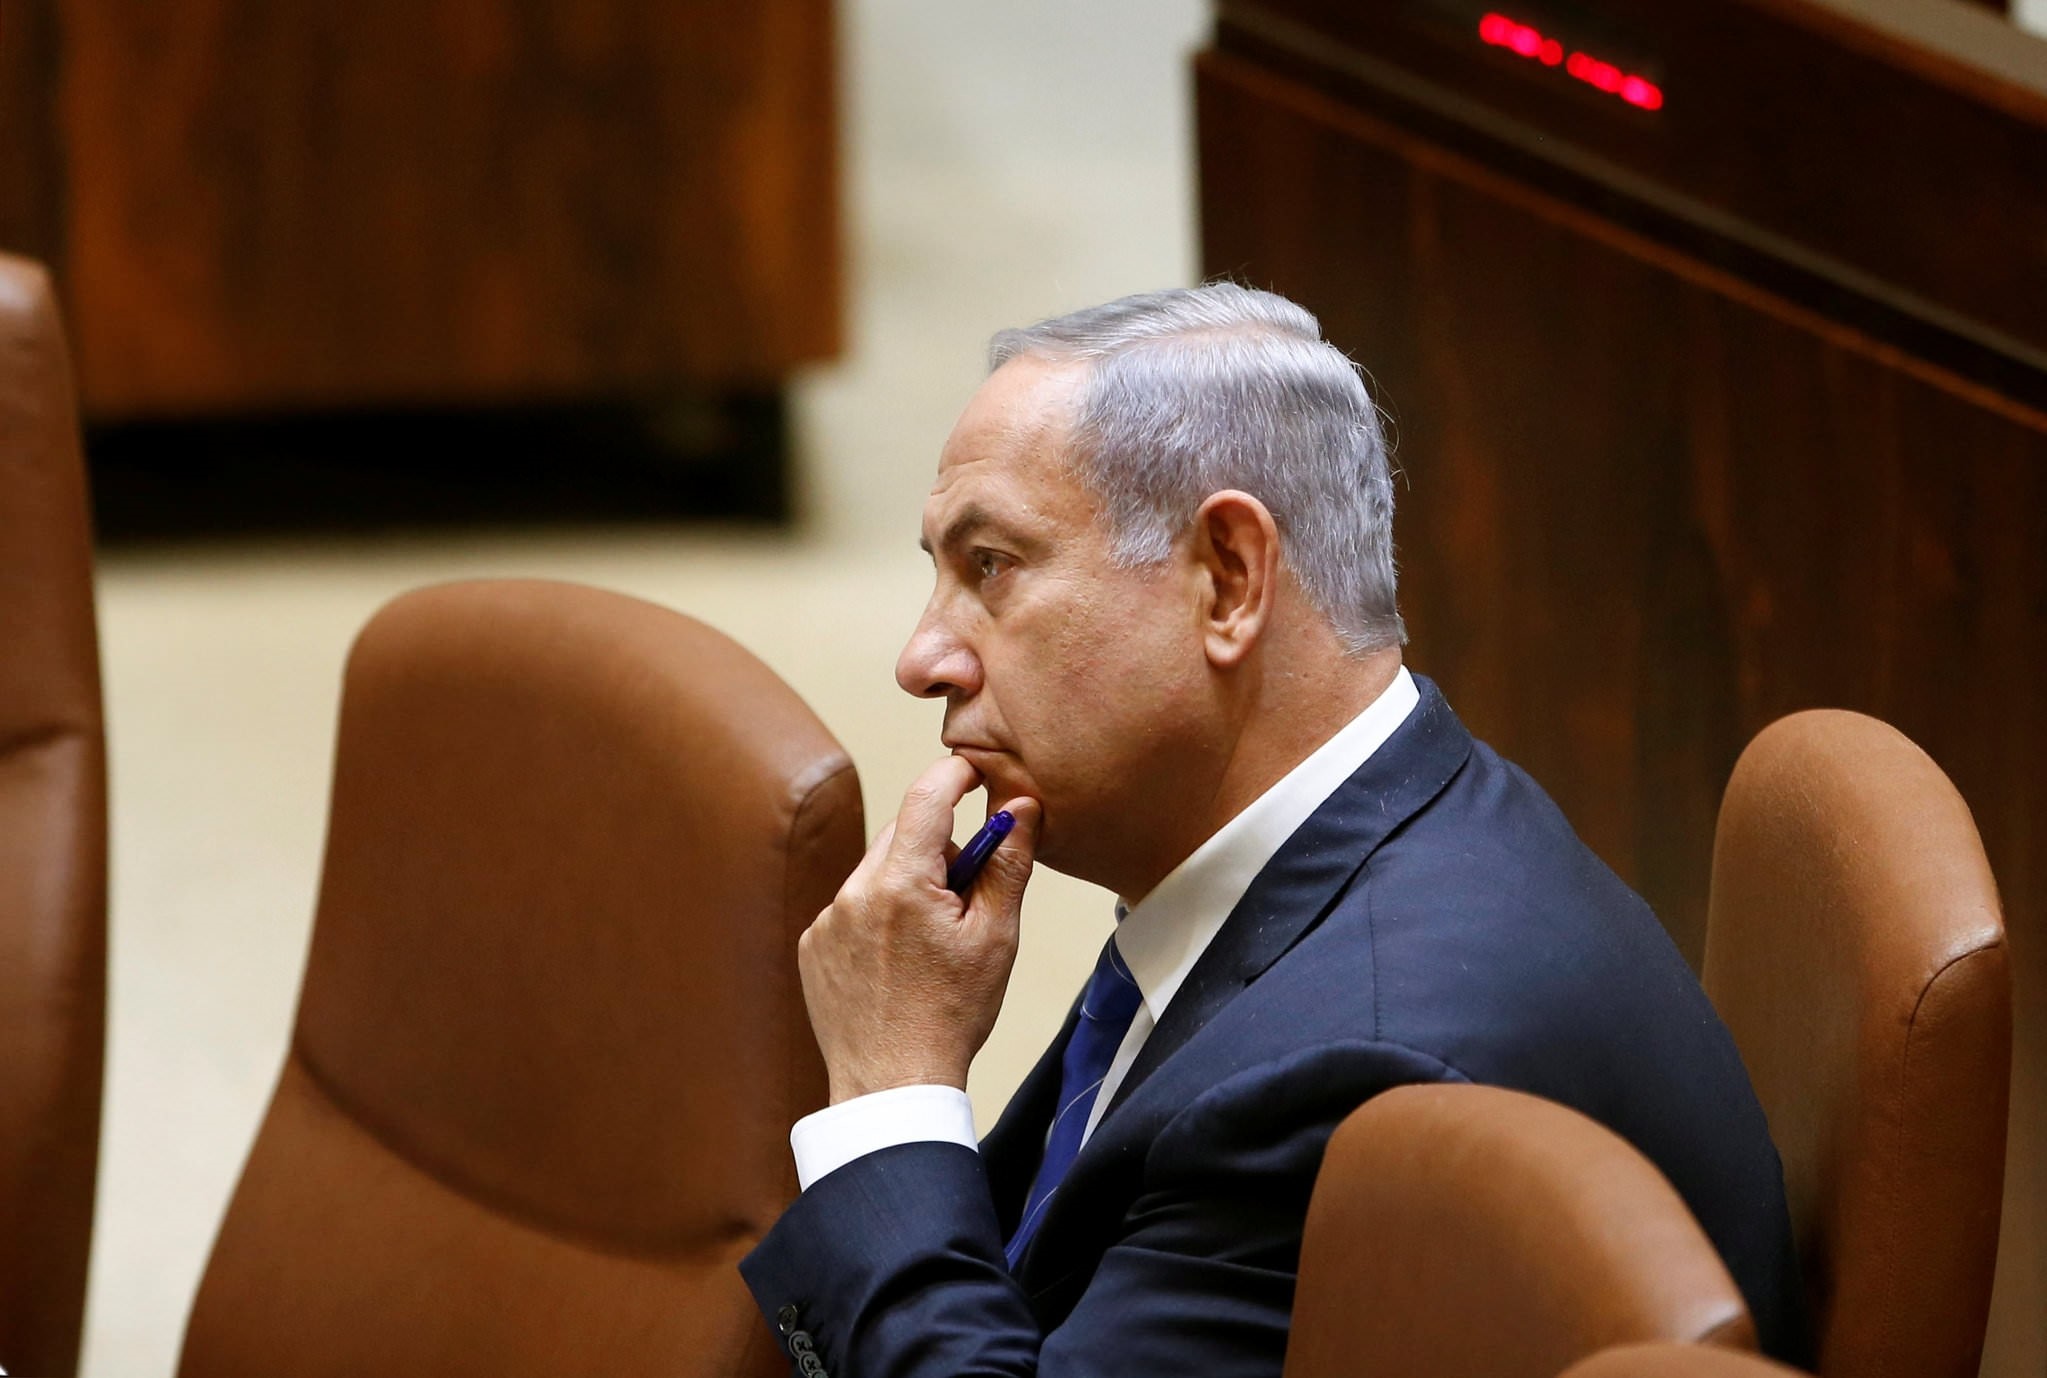 Israeli Prime Minister Benjamin Netanyahu attends a session at the Knesset, the Israeli parliament in Jerusalem, May 23, 2016. (Reuters Photo)